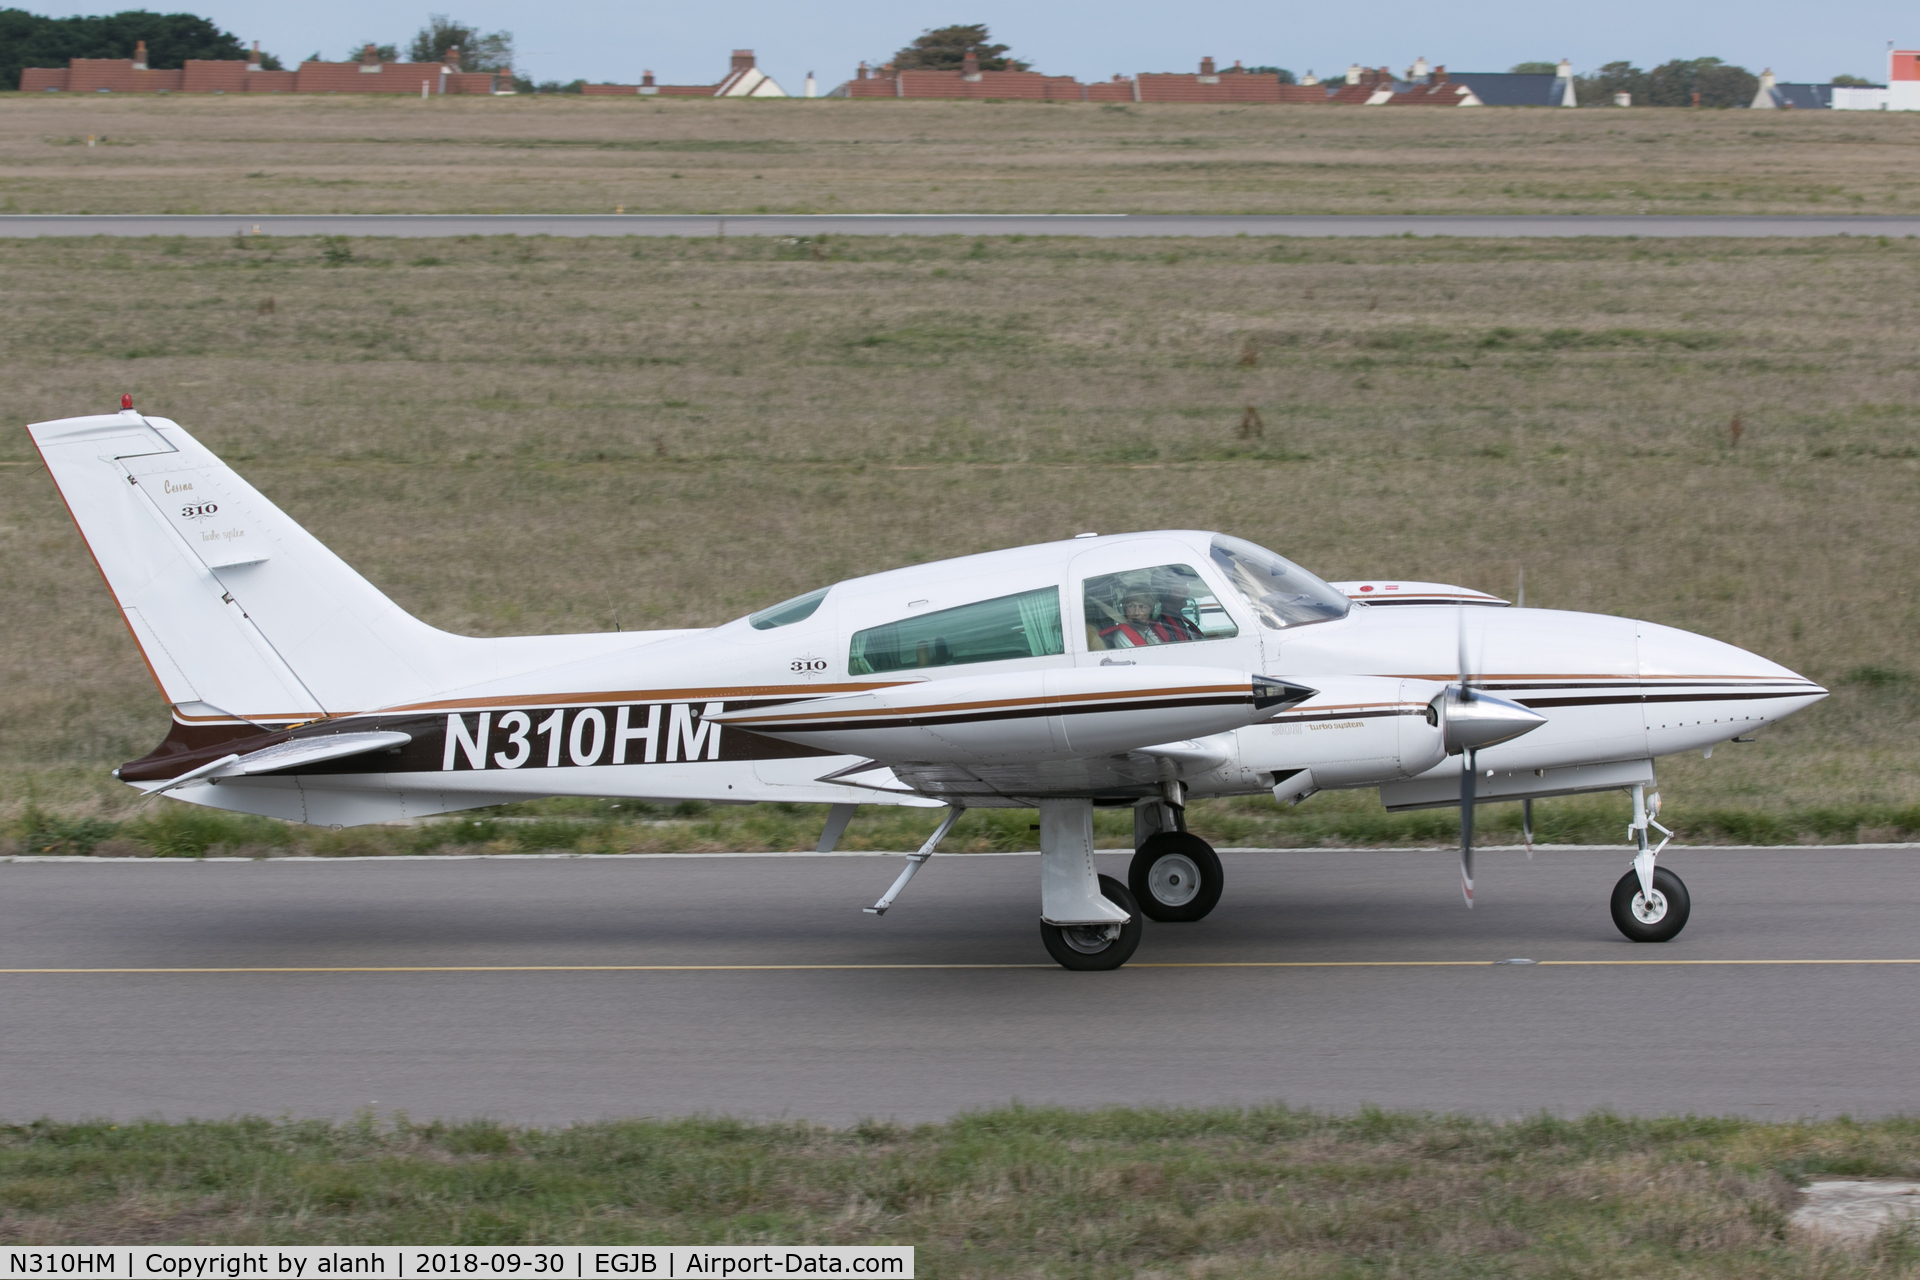 N310HM, 1978 Cessna T310R C/N 310R1282, Taxiing in at Guernsey